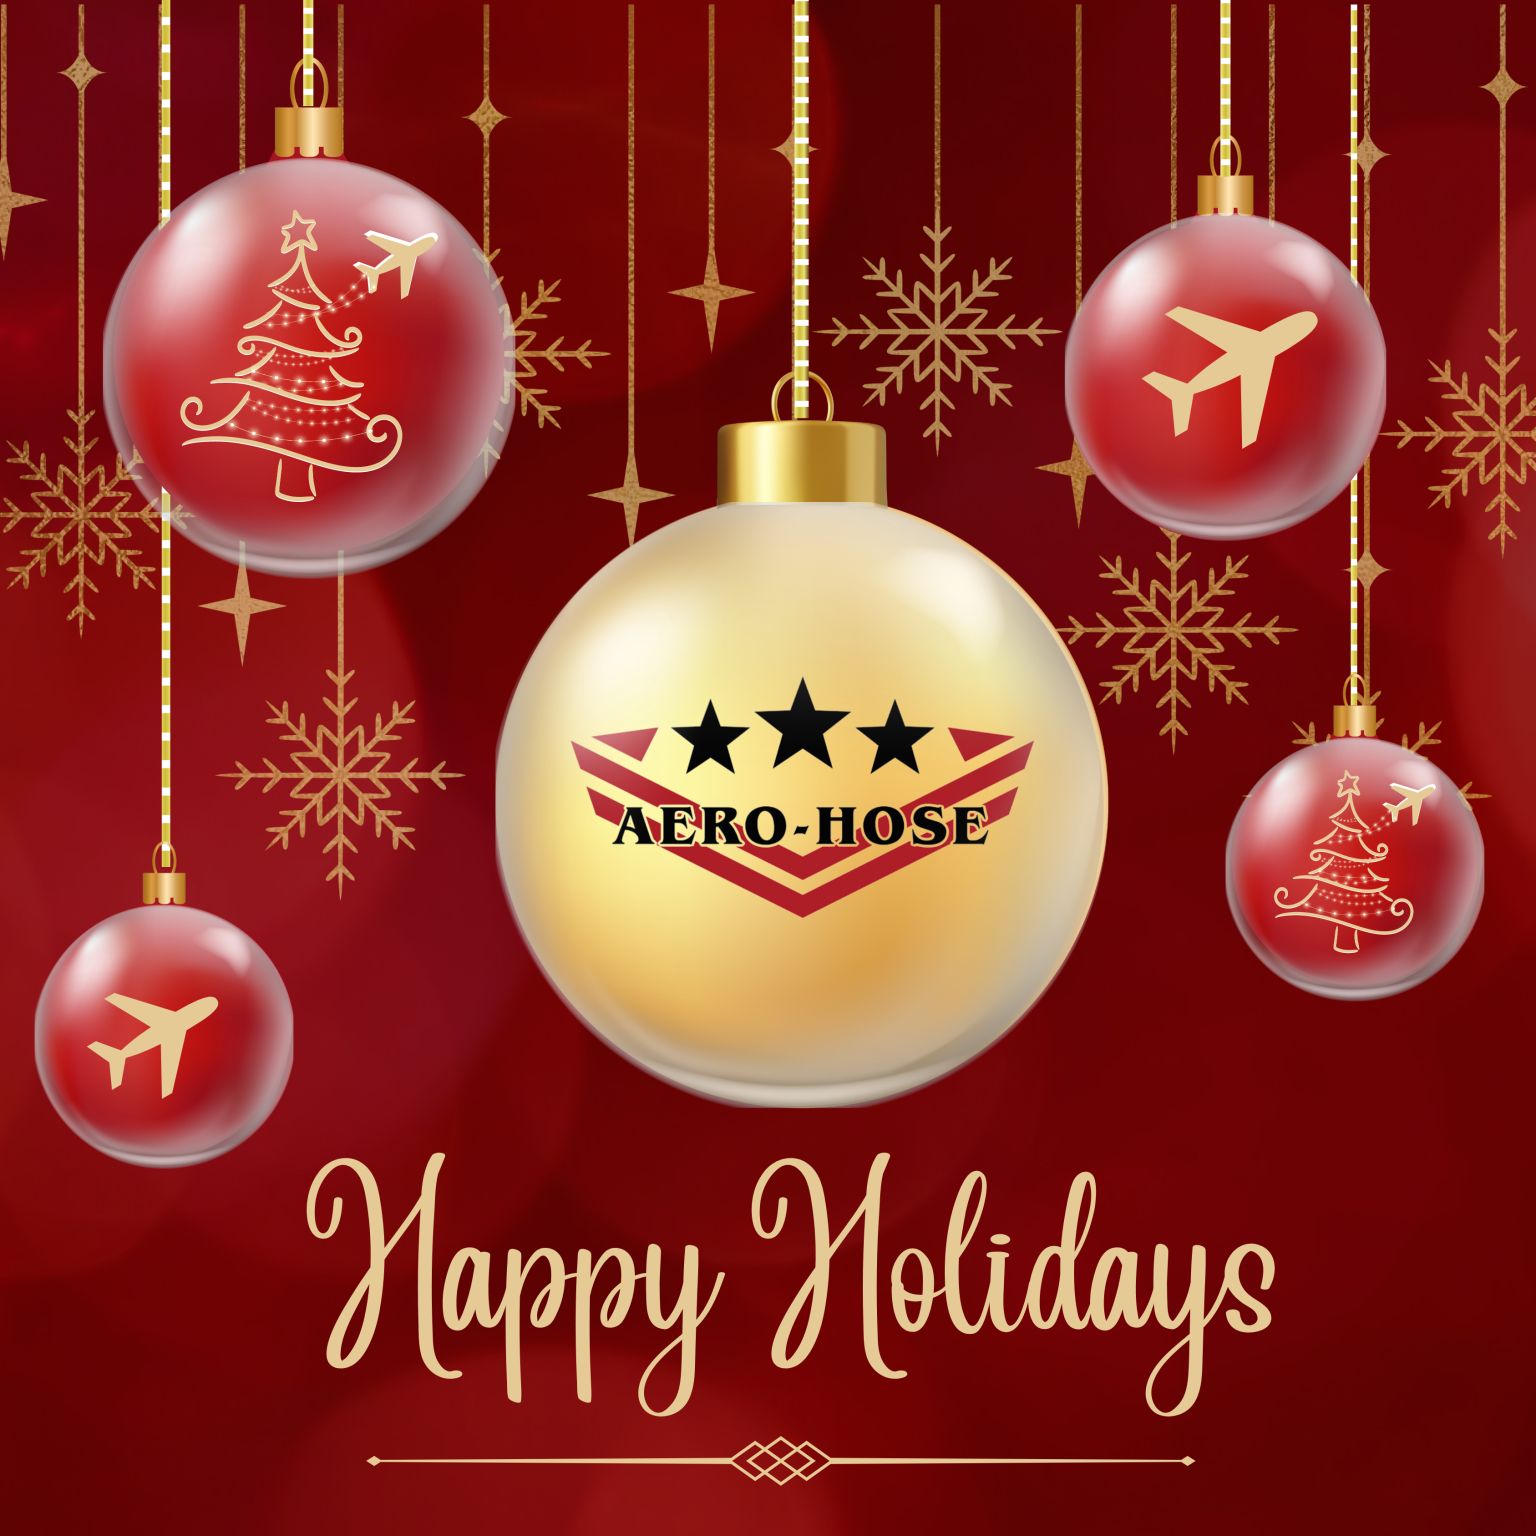 holiday greeting card with "happy holidays" message, featuring gold and red ornaments with snowflakes and a logo for 'aero-hose' on a red background. this description is saved as an